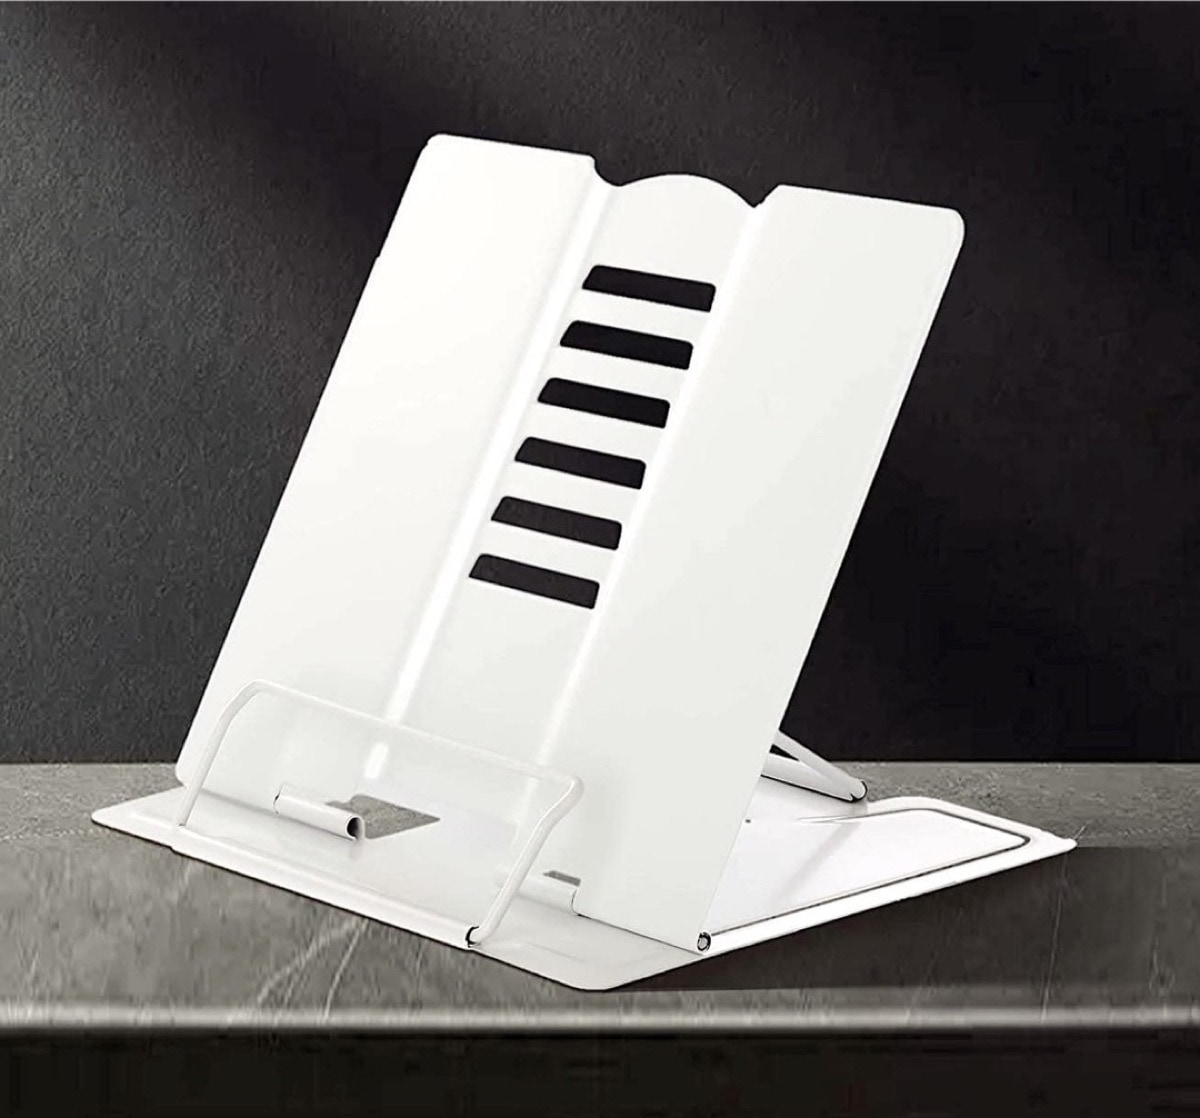 Foldable metal book and texbook holder - hands-free reading